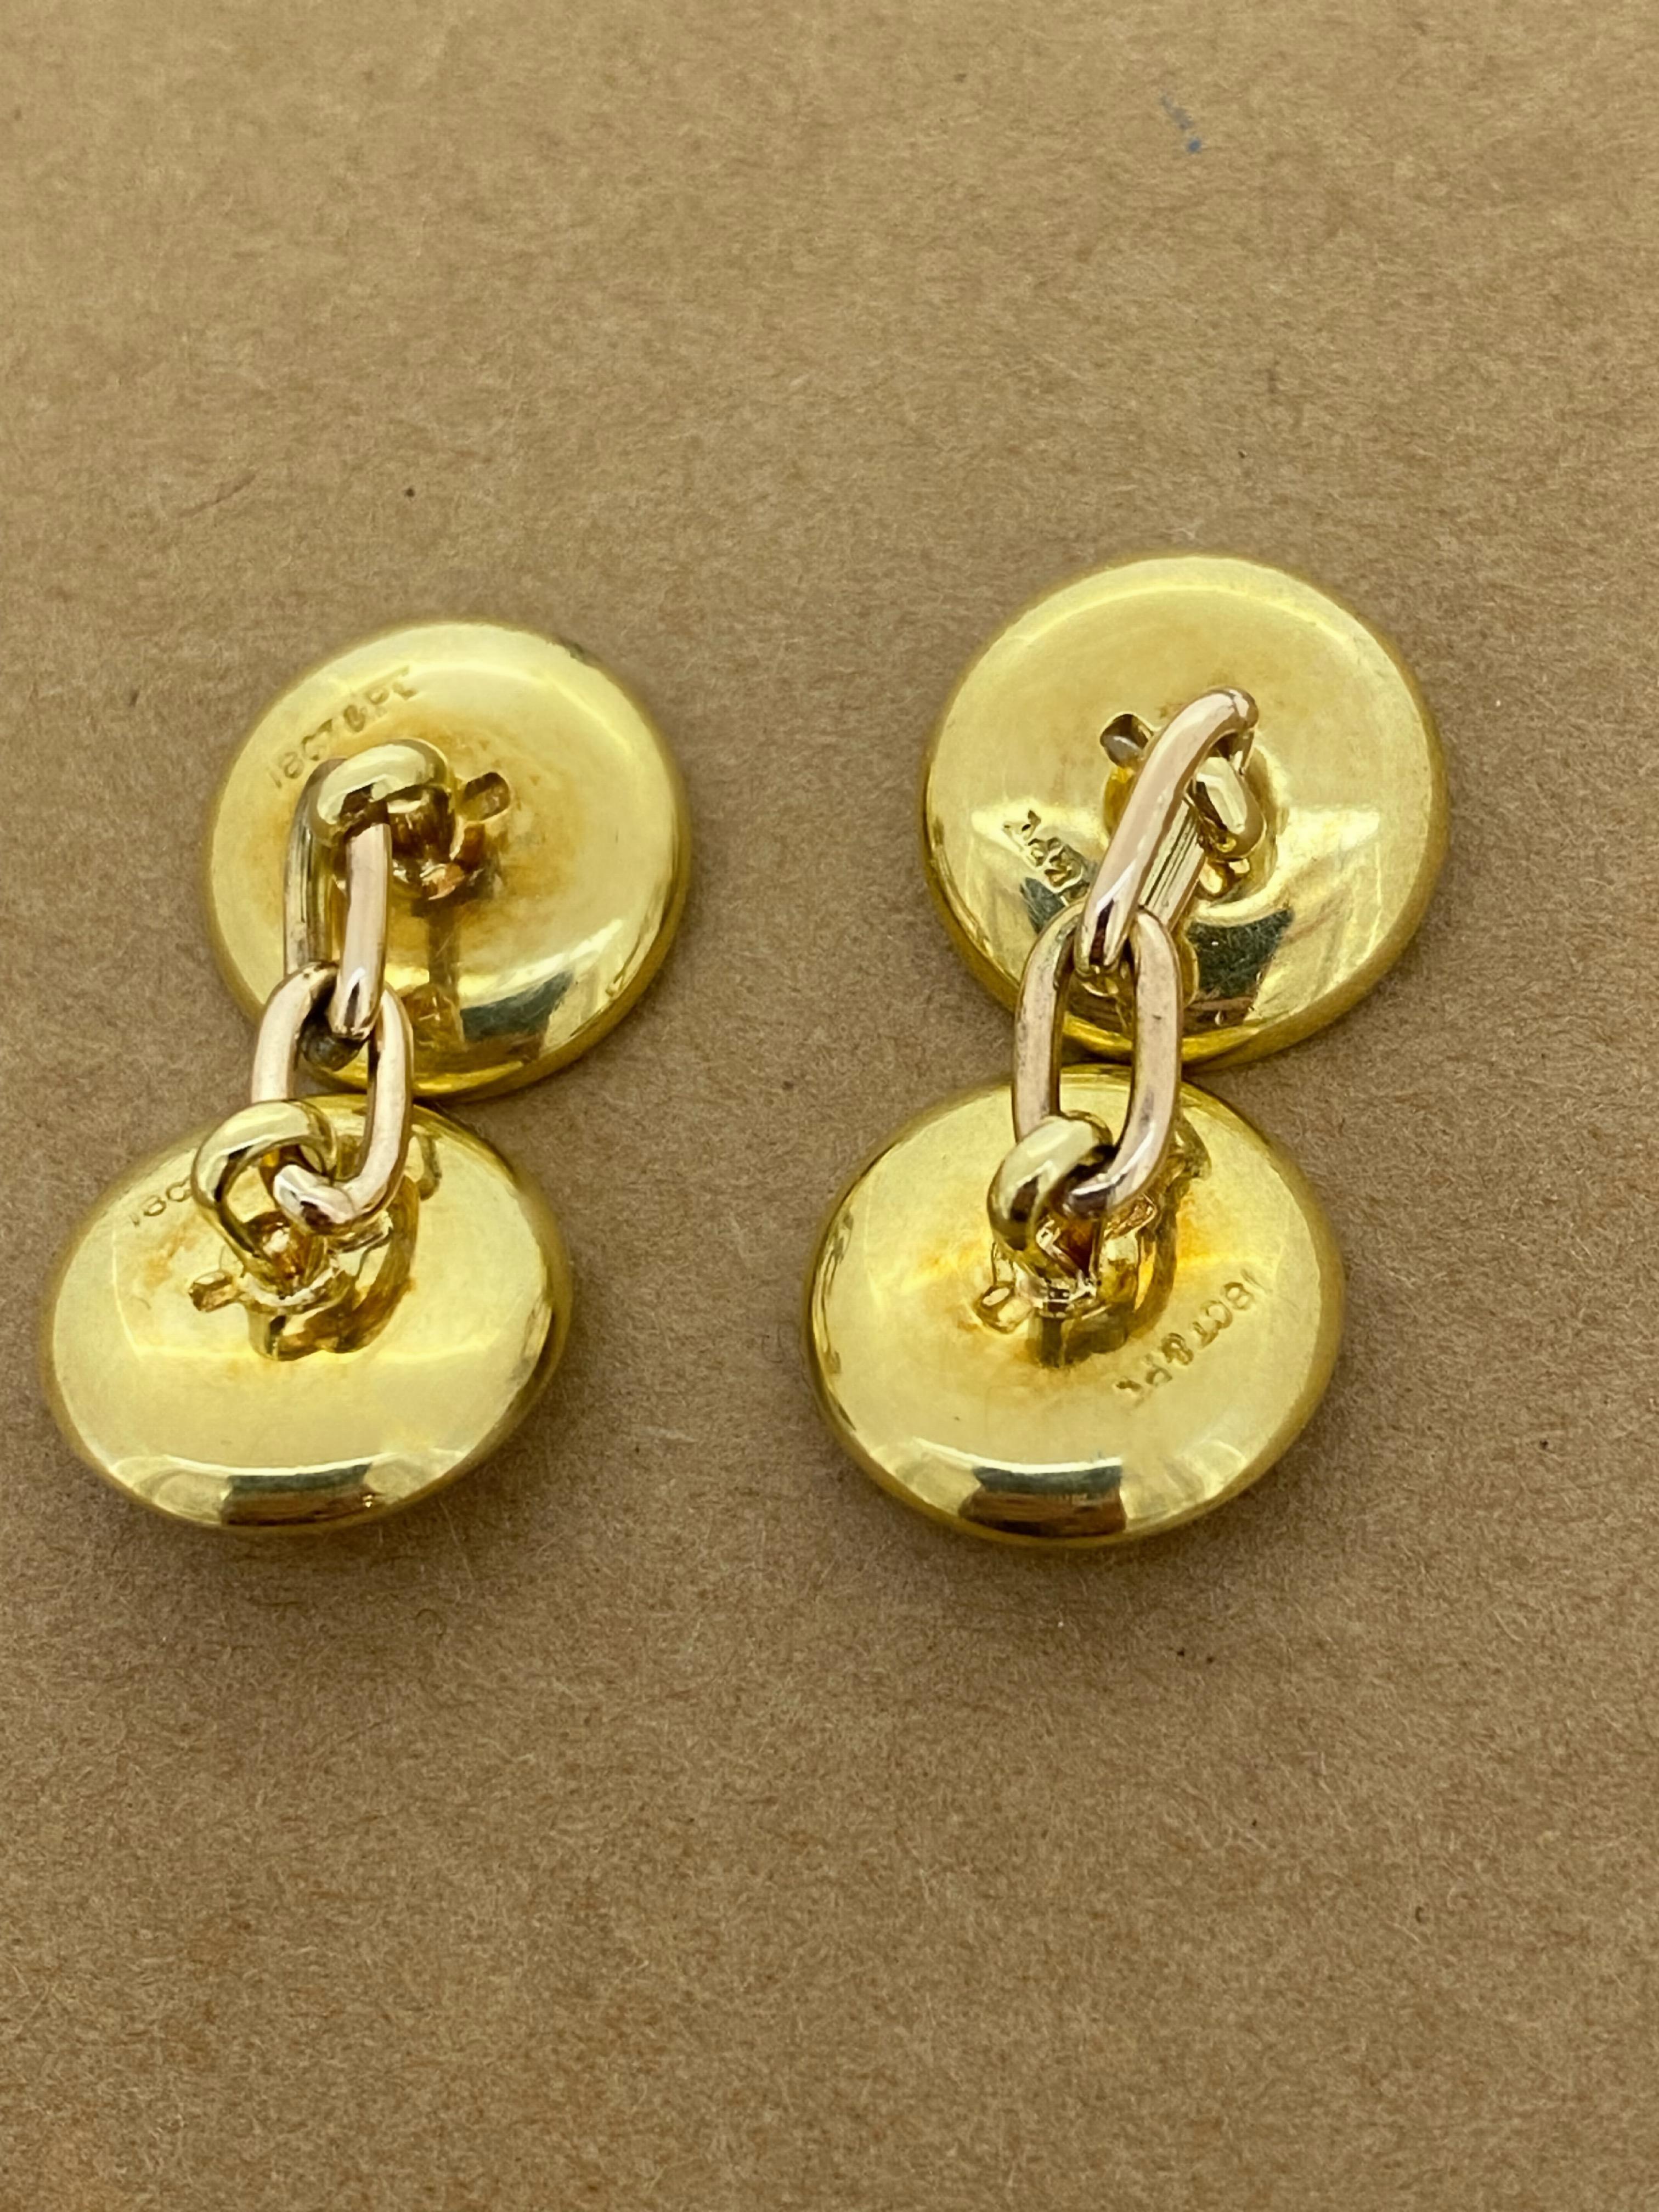 Designed as chain link cufflinks,

featuring 2 Disks 
set in platinum 
this piece is antique, 
dating back to Art-Deco era 
 
Finely crafted in 18K Yellow Gold & 
Platinum 
 
Elongated oval links secure these cufflinks on the cuff.
~~~

Total item's